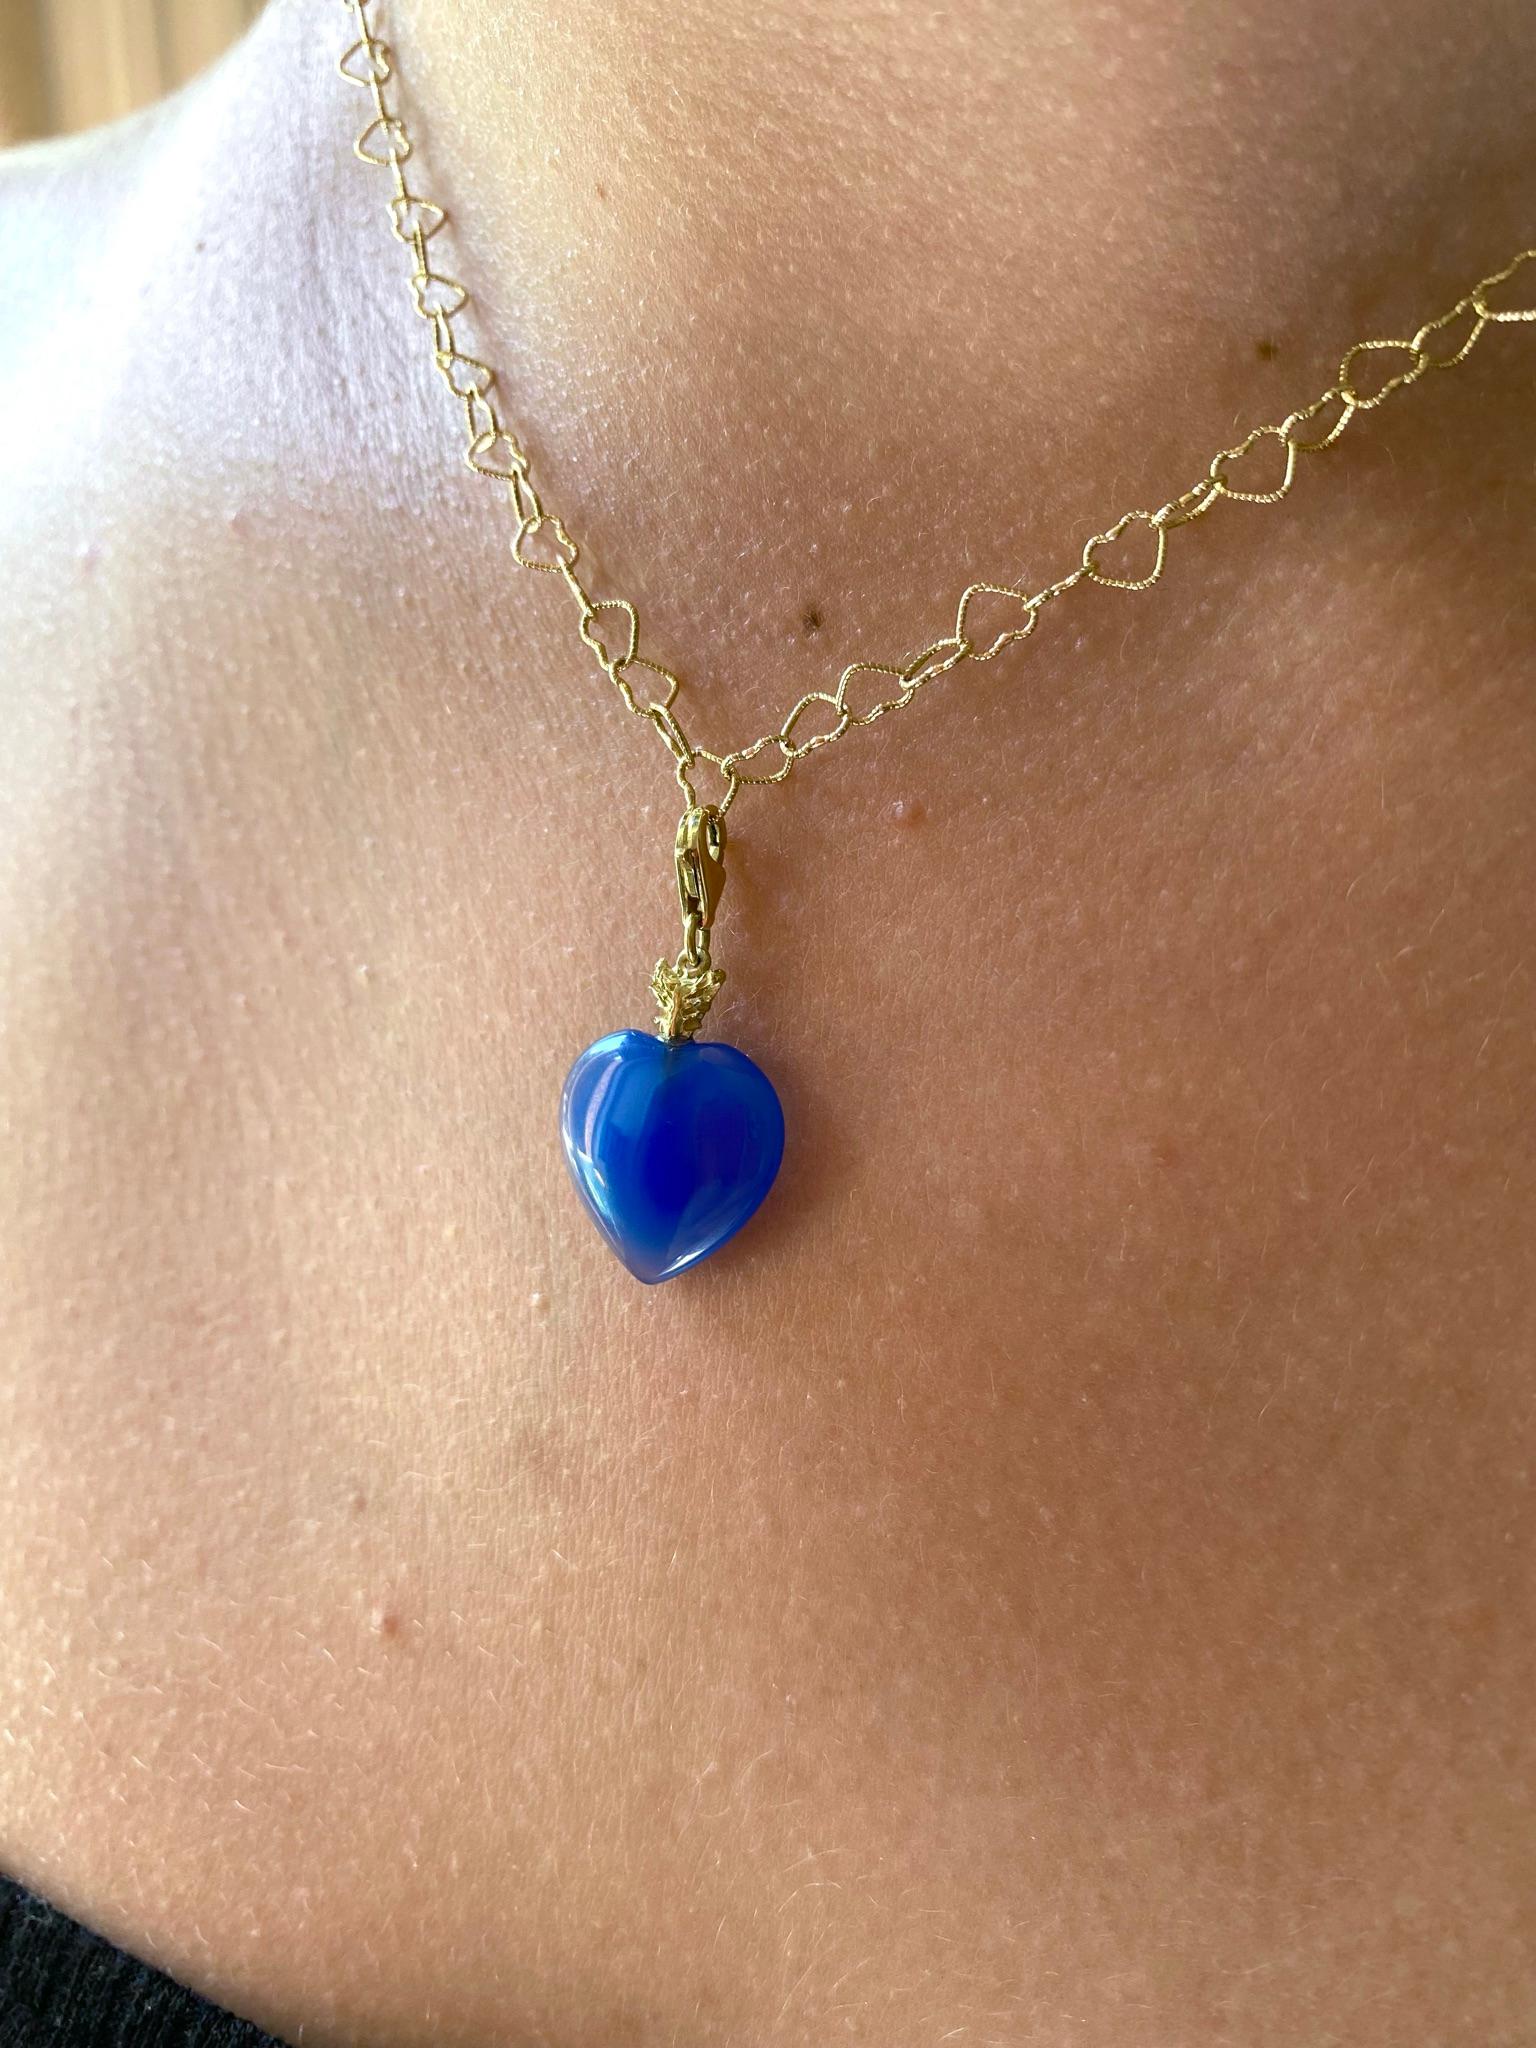 Rossella Ugolini Design Collection, a love gift openly inspired by the meaning of the Heart with the Feather shape of the arrow linked to Love, Cupid, Emotion.  
A nice pendant handcrafted in 18 karats gold fether adorned with beautiful deep blue